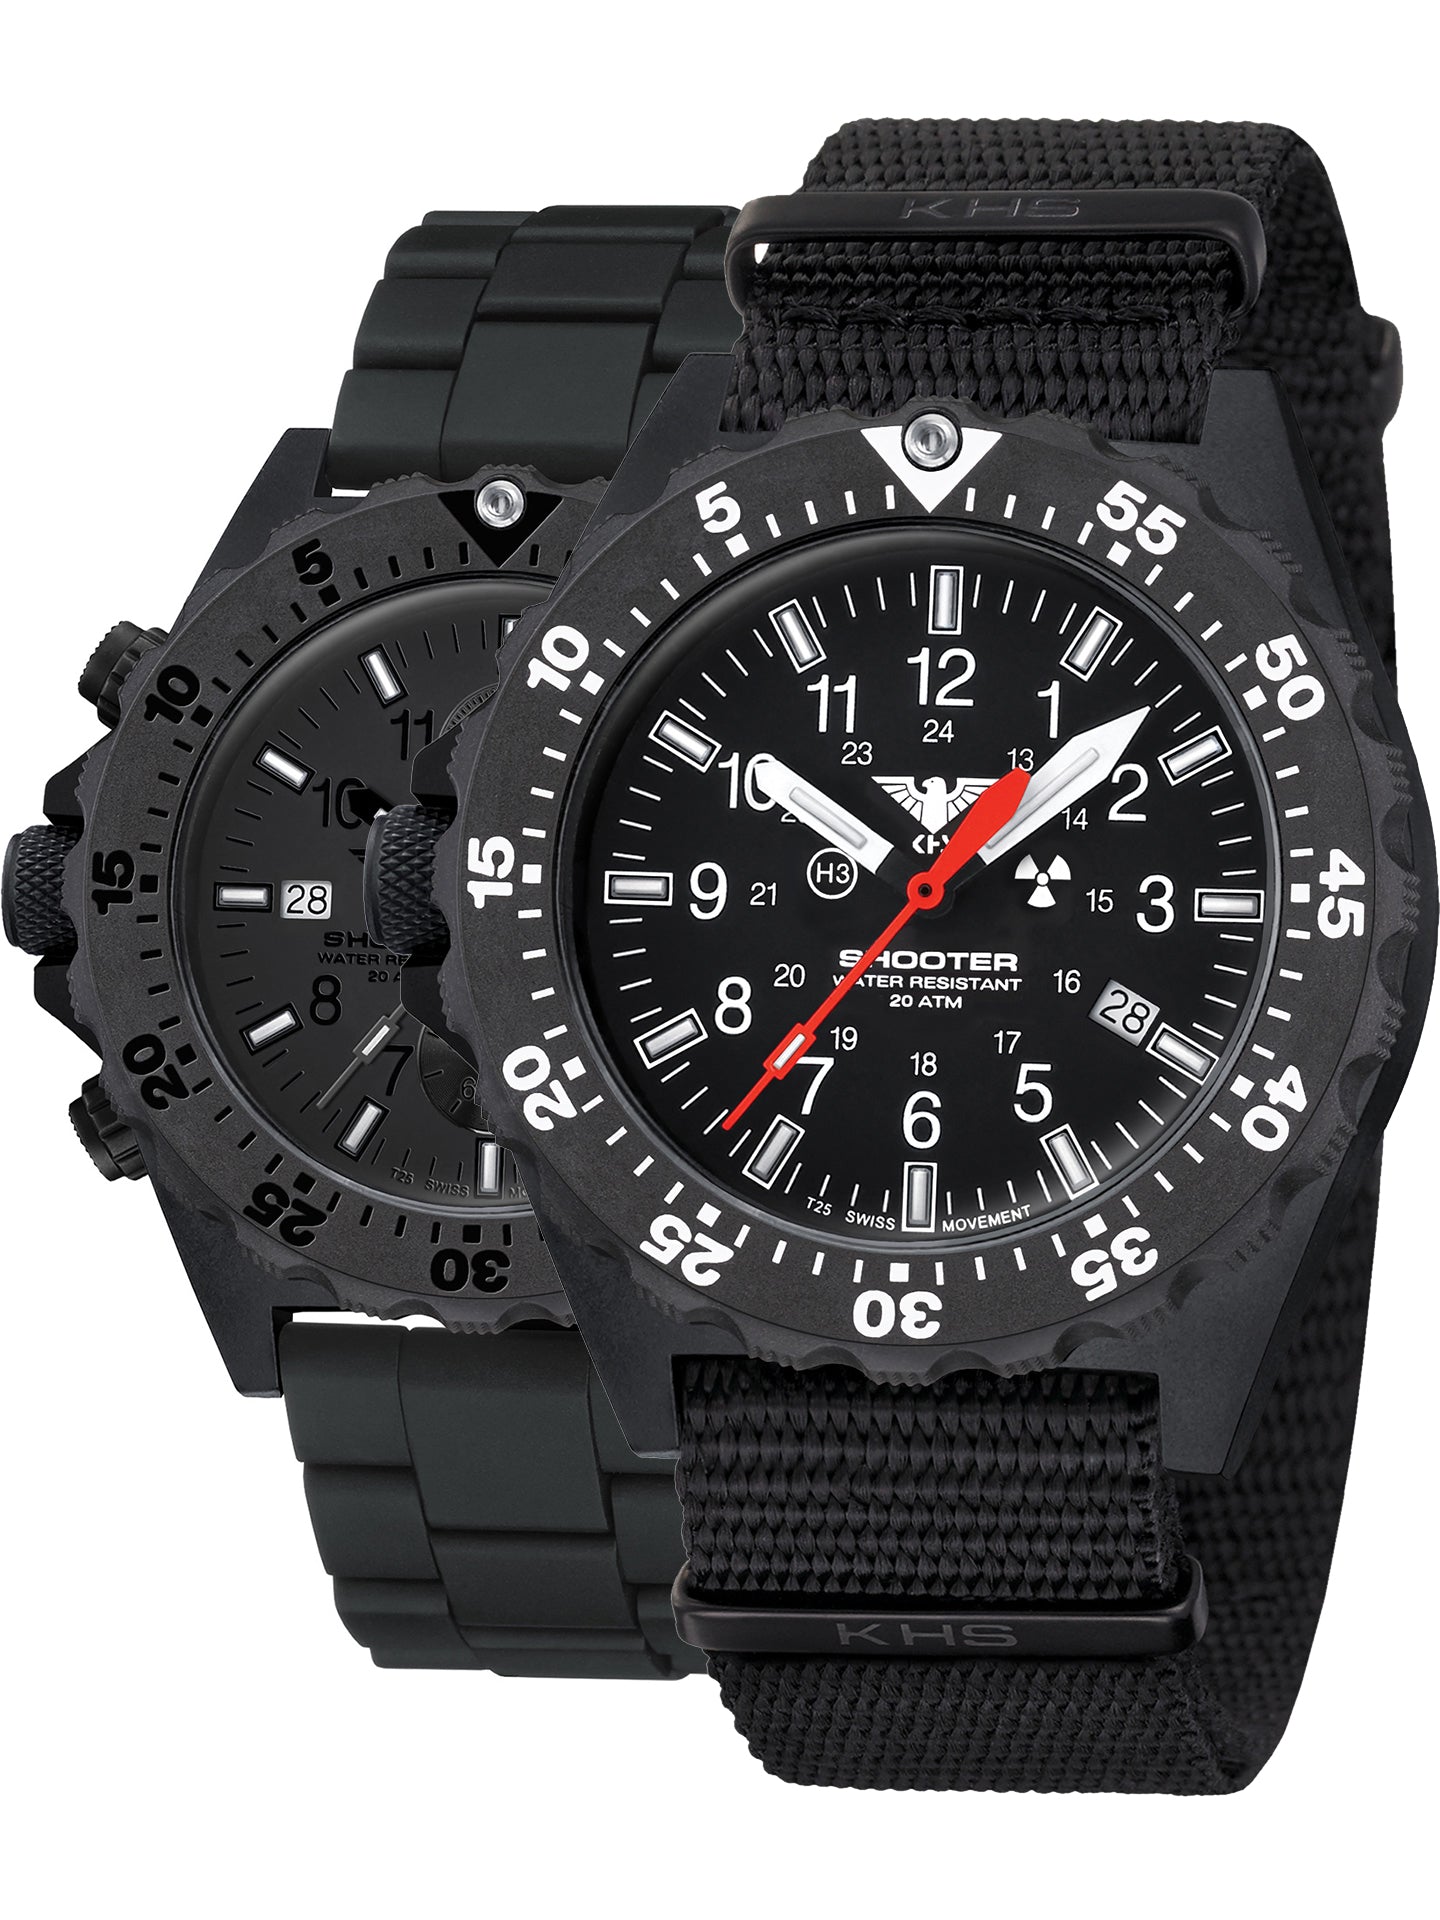 KHS Tactical watches